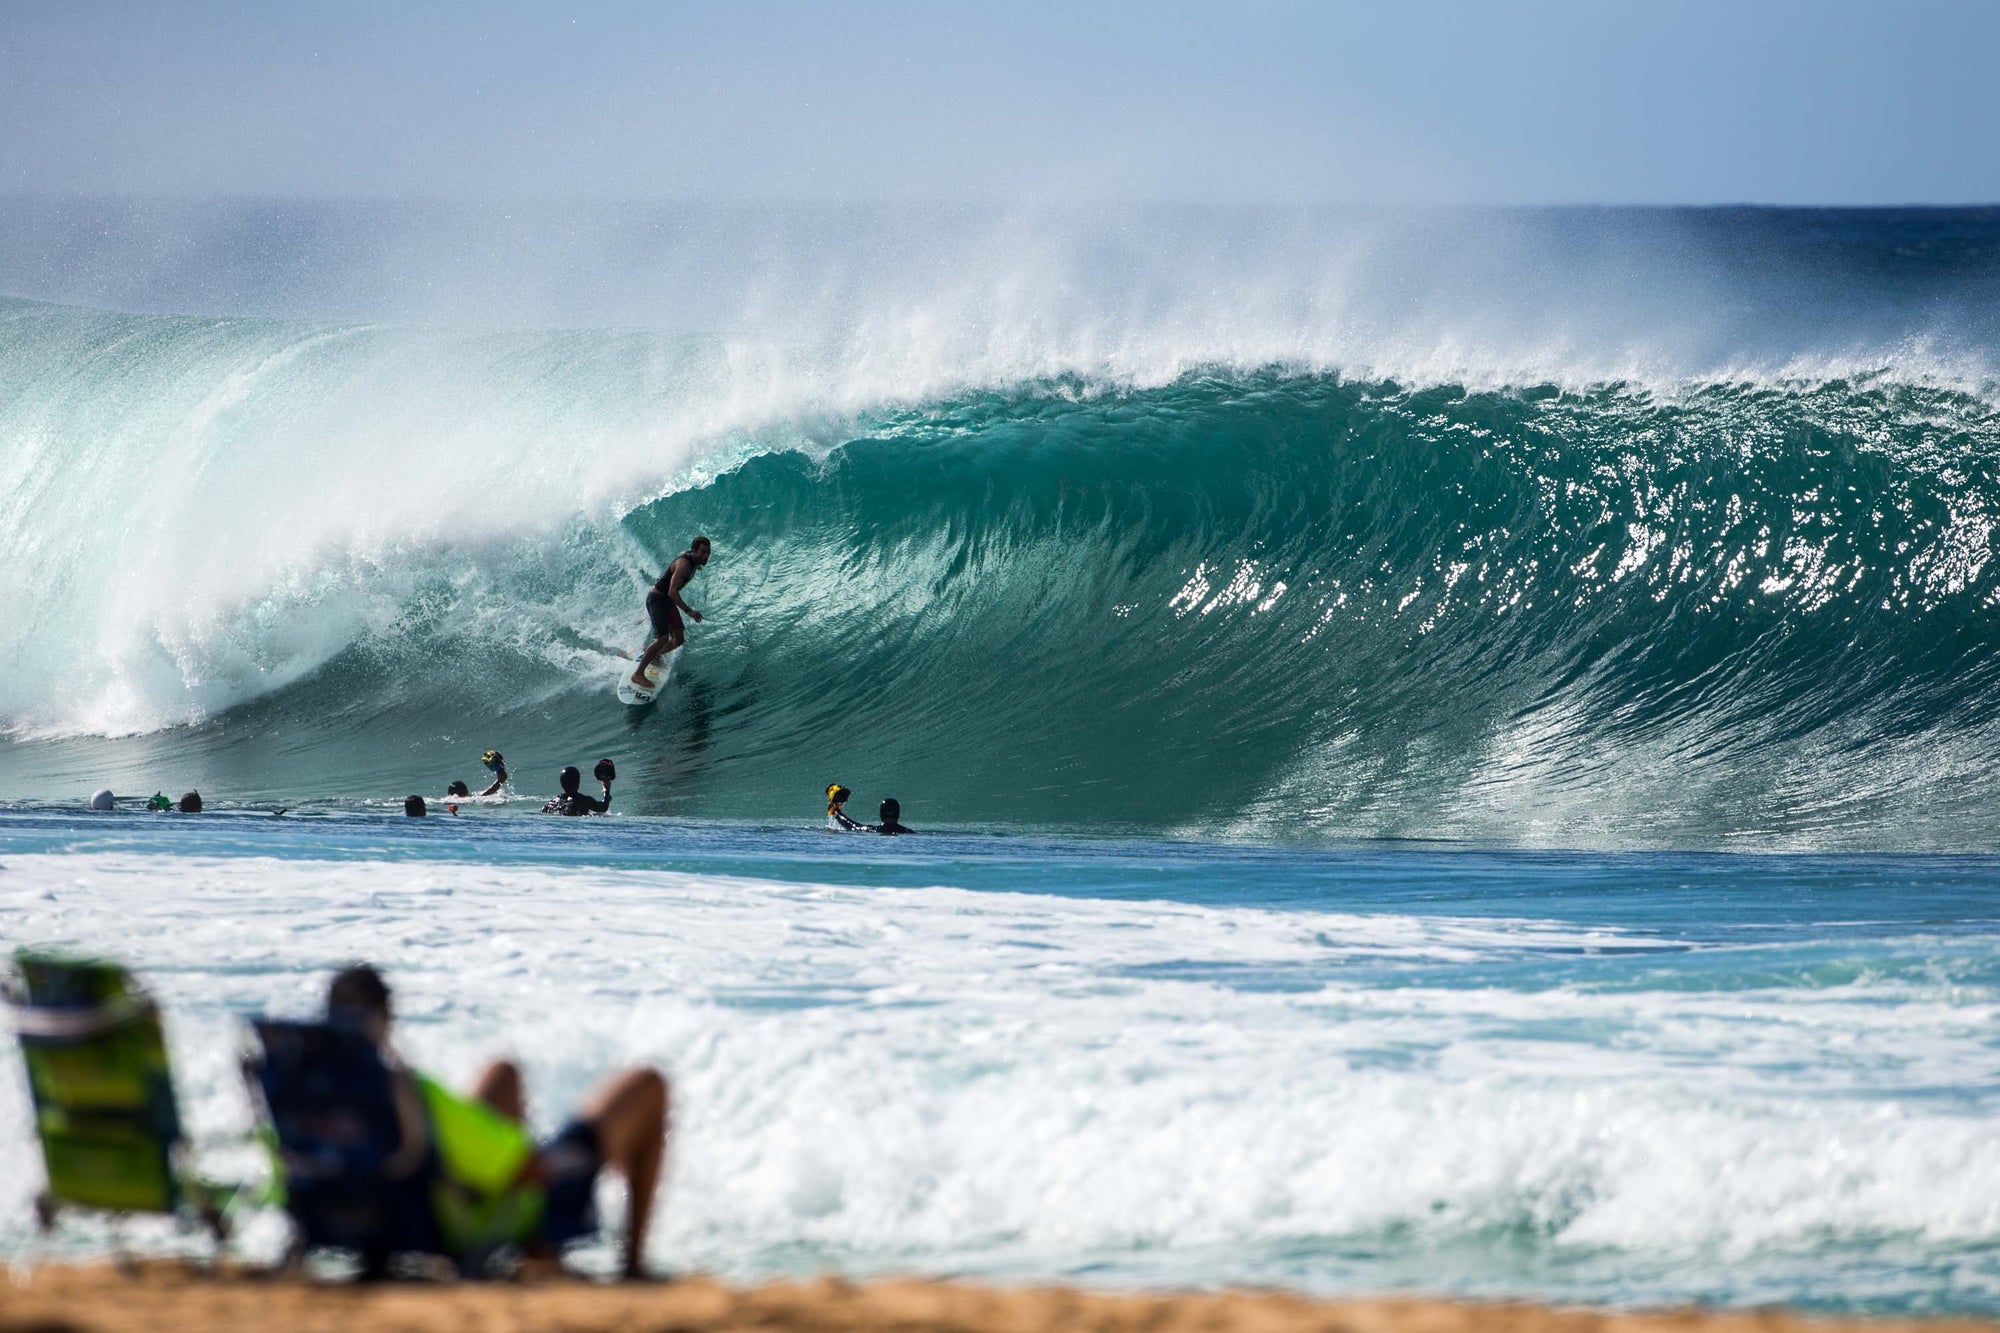 Nate Yeomans, Hawaii - Chronicles of Christie